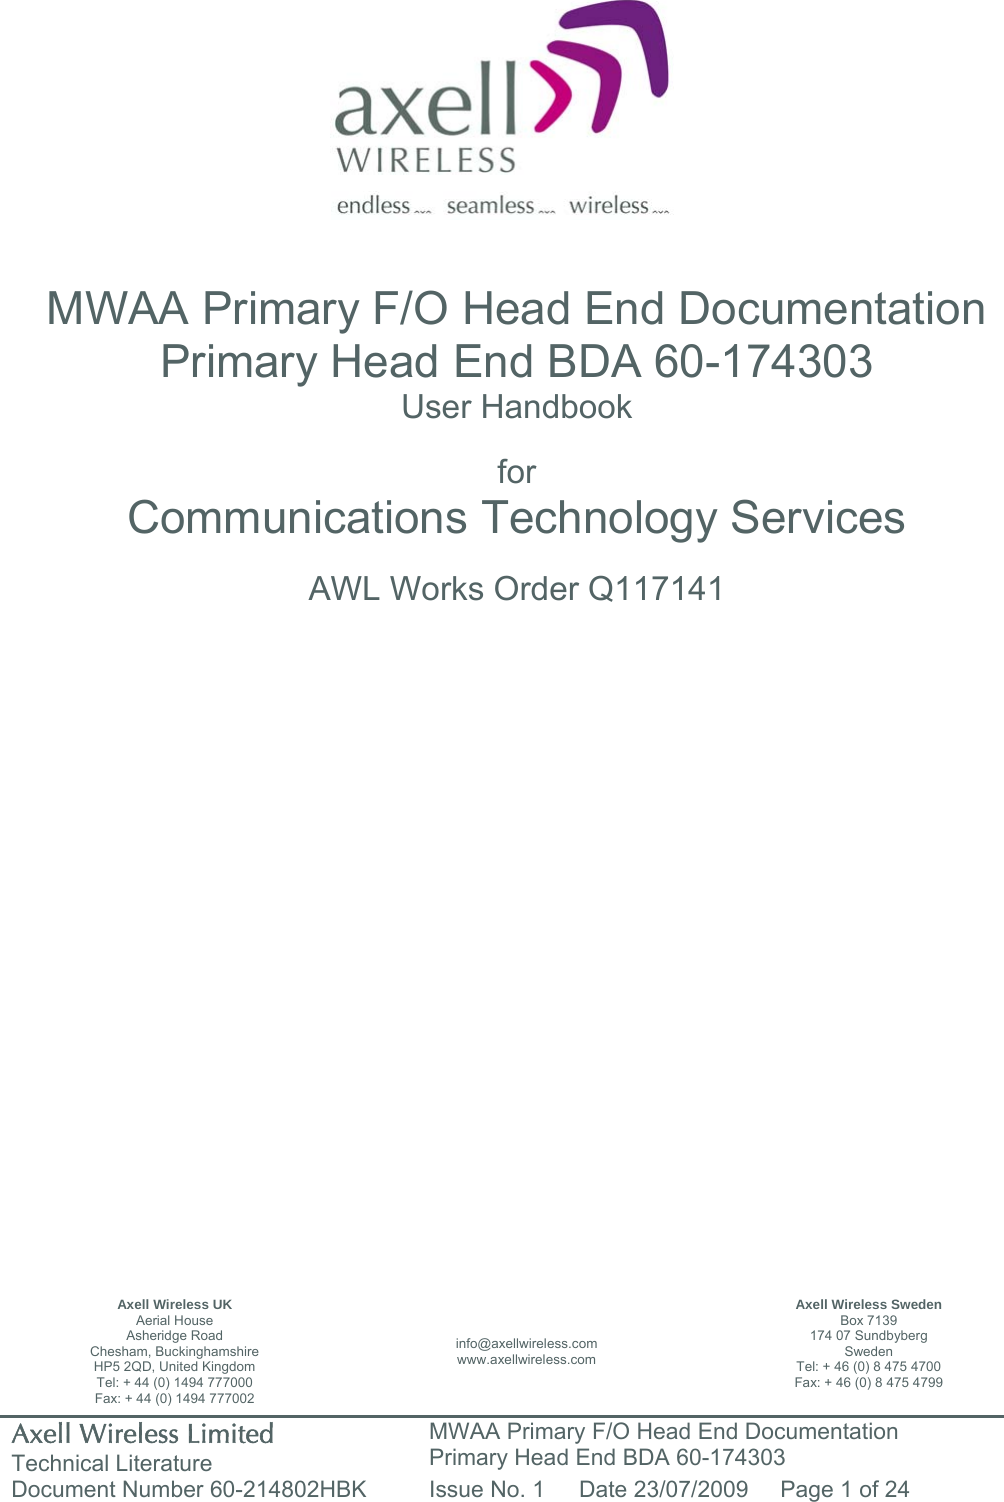 Axell Wireless Limited Technical Literature MWAA Primary F/O Head End Documentation Primary Head End BDA 60-174303 Document Number 60-214802HBK  Issue No. 1  Date 23/07/2009  Page 1 of 24                   MWAA Primary F/O Head End Documentation Primary Head End BDA 60-174303 User Handbook  for Communications Technology Services  AWL Works Order Q117141                           Axell Wireless UK Aerial House Asheridge Road Chesham, Buckinghamshire HP5 2QD, United Kingdom Tel: + 44 (0) 1494 777000 Fax: + 44 (0) 1494 777002 info@axellwireless.com www.axellwireless.com Axell Wireless Sweden Box 7139 174 07 Sundbyberg Sweden Tel: + 46 (0) 8 475 4700 Fax: + 46 (0) 8 475 4799 